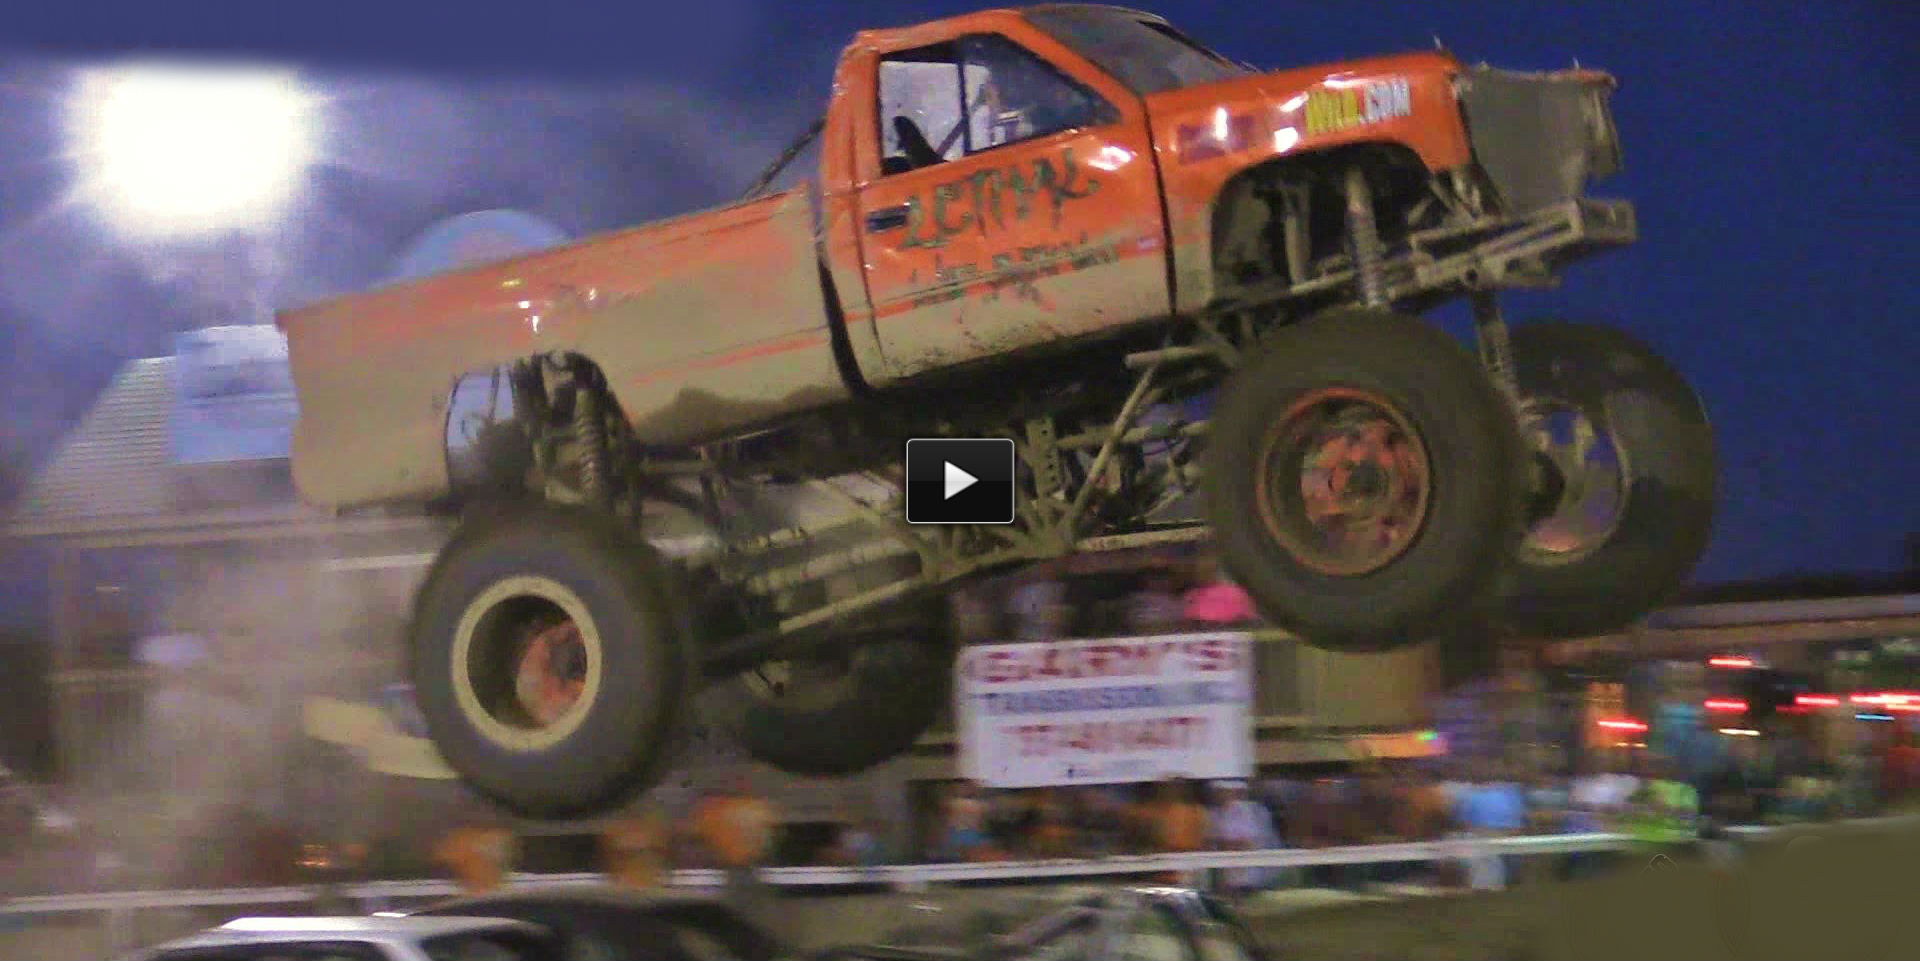 lethal weapon mega truck freestyle Dennis Anderson